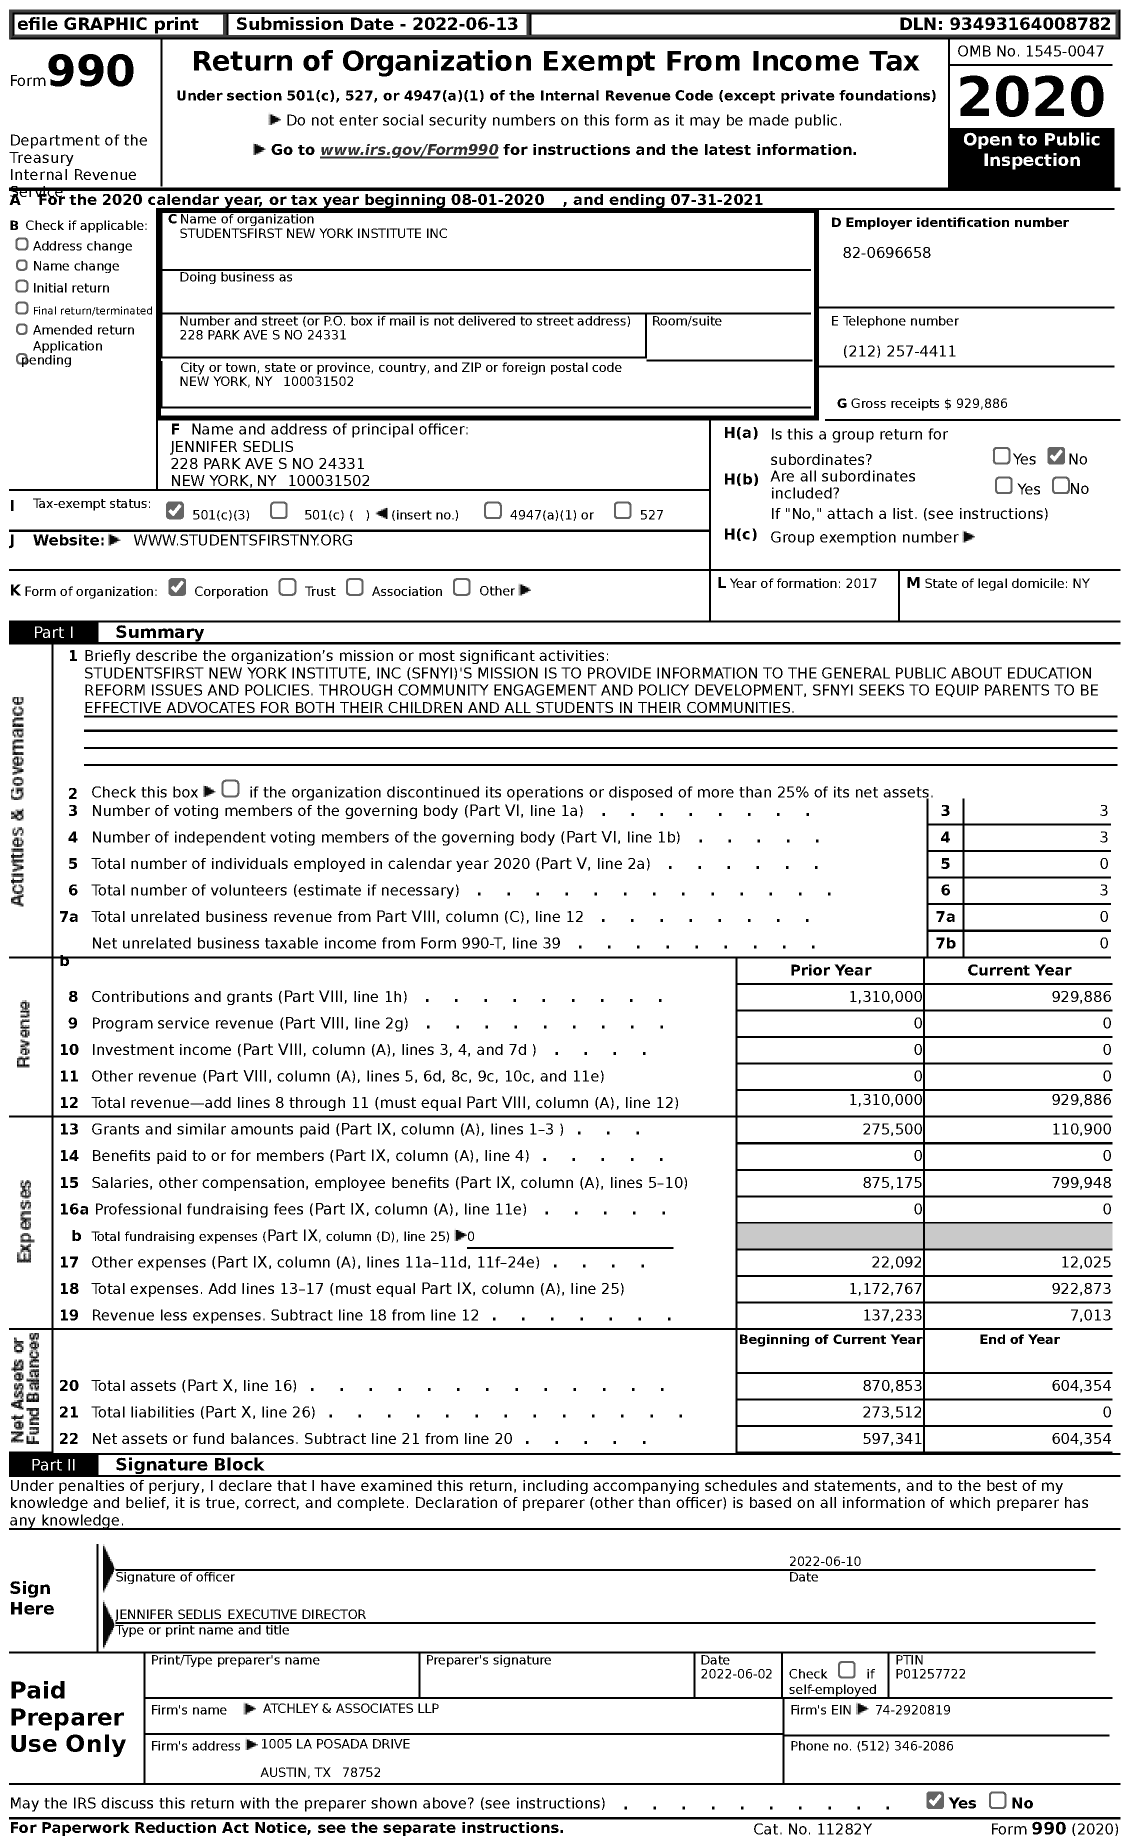 Image of first page of 2020 Form 990 for Studentsfirst New York Institute